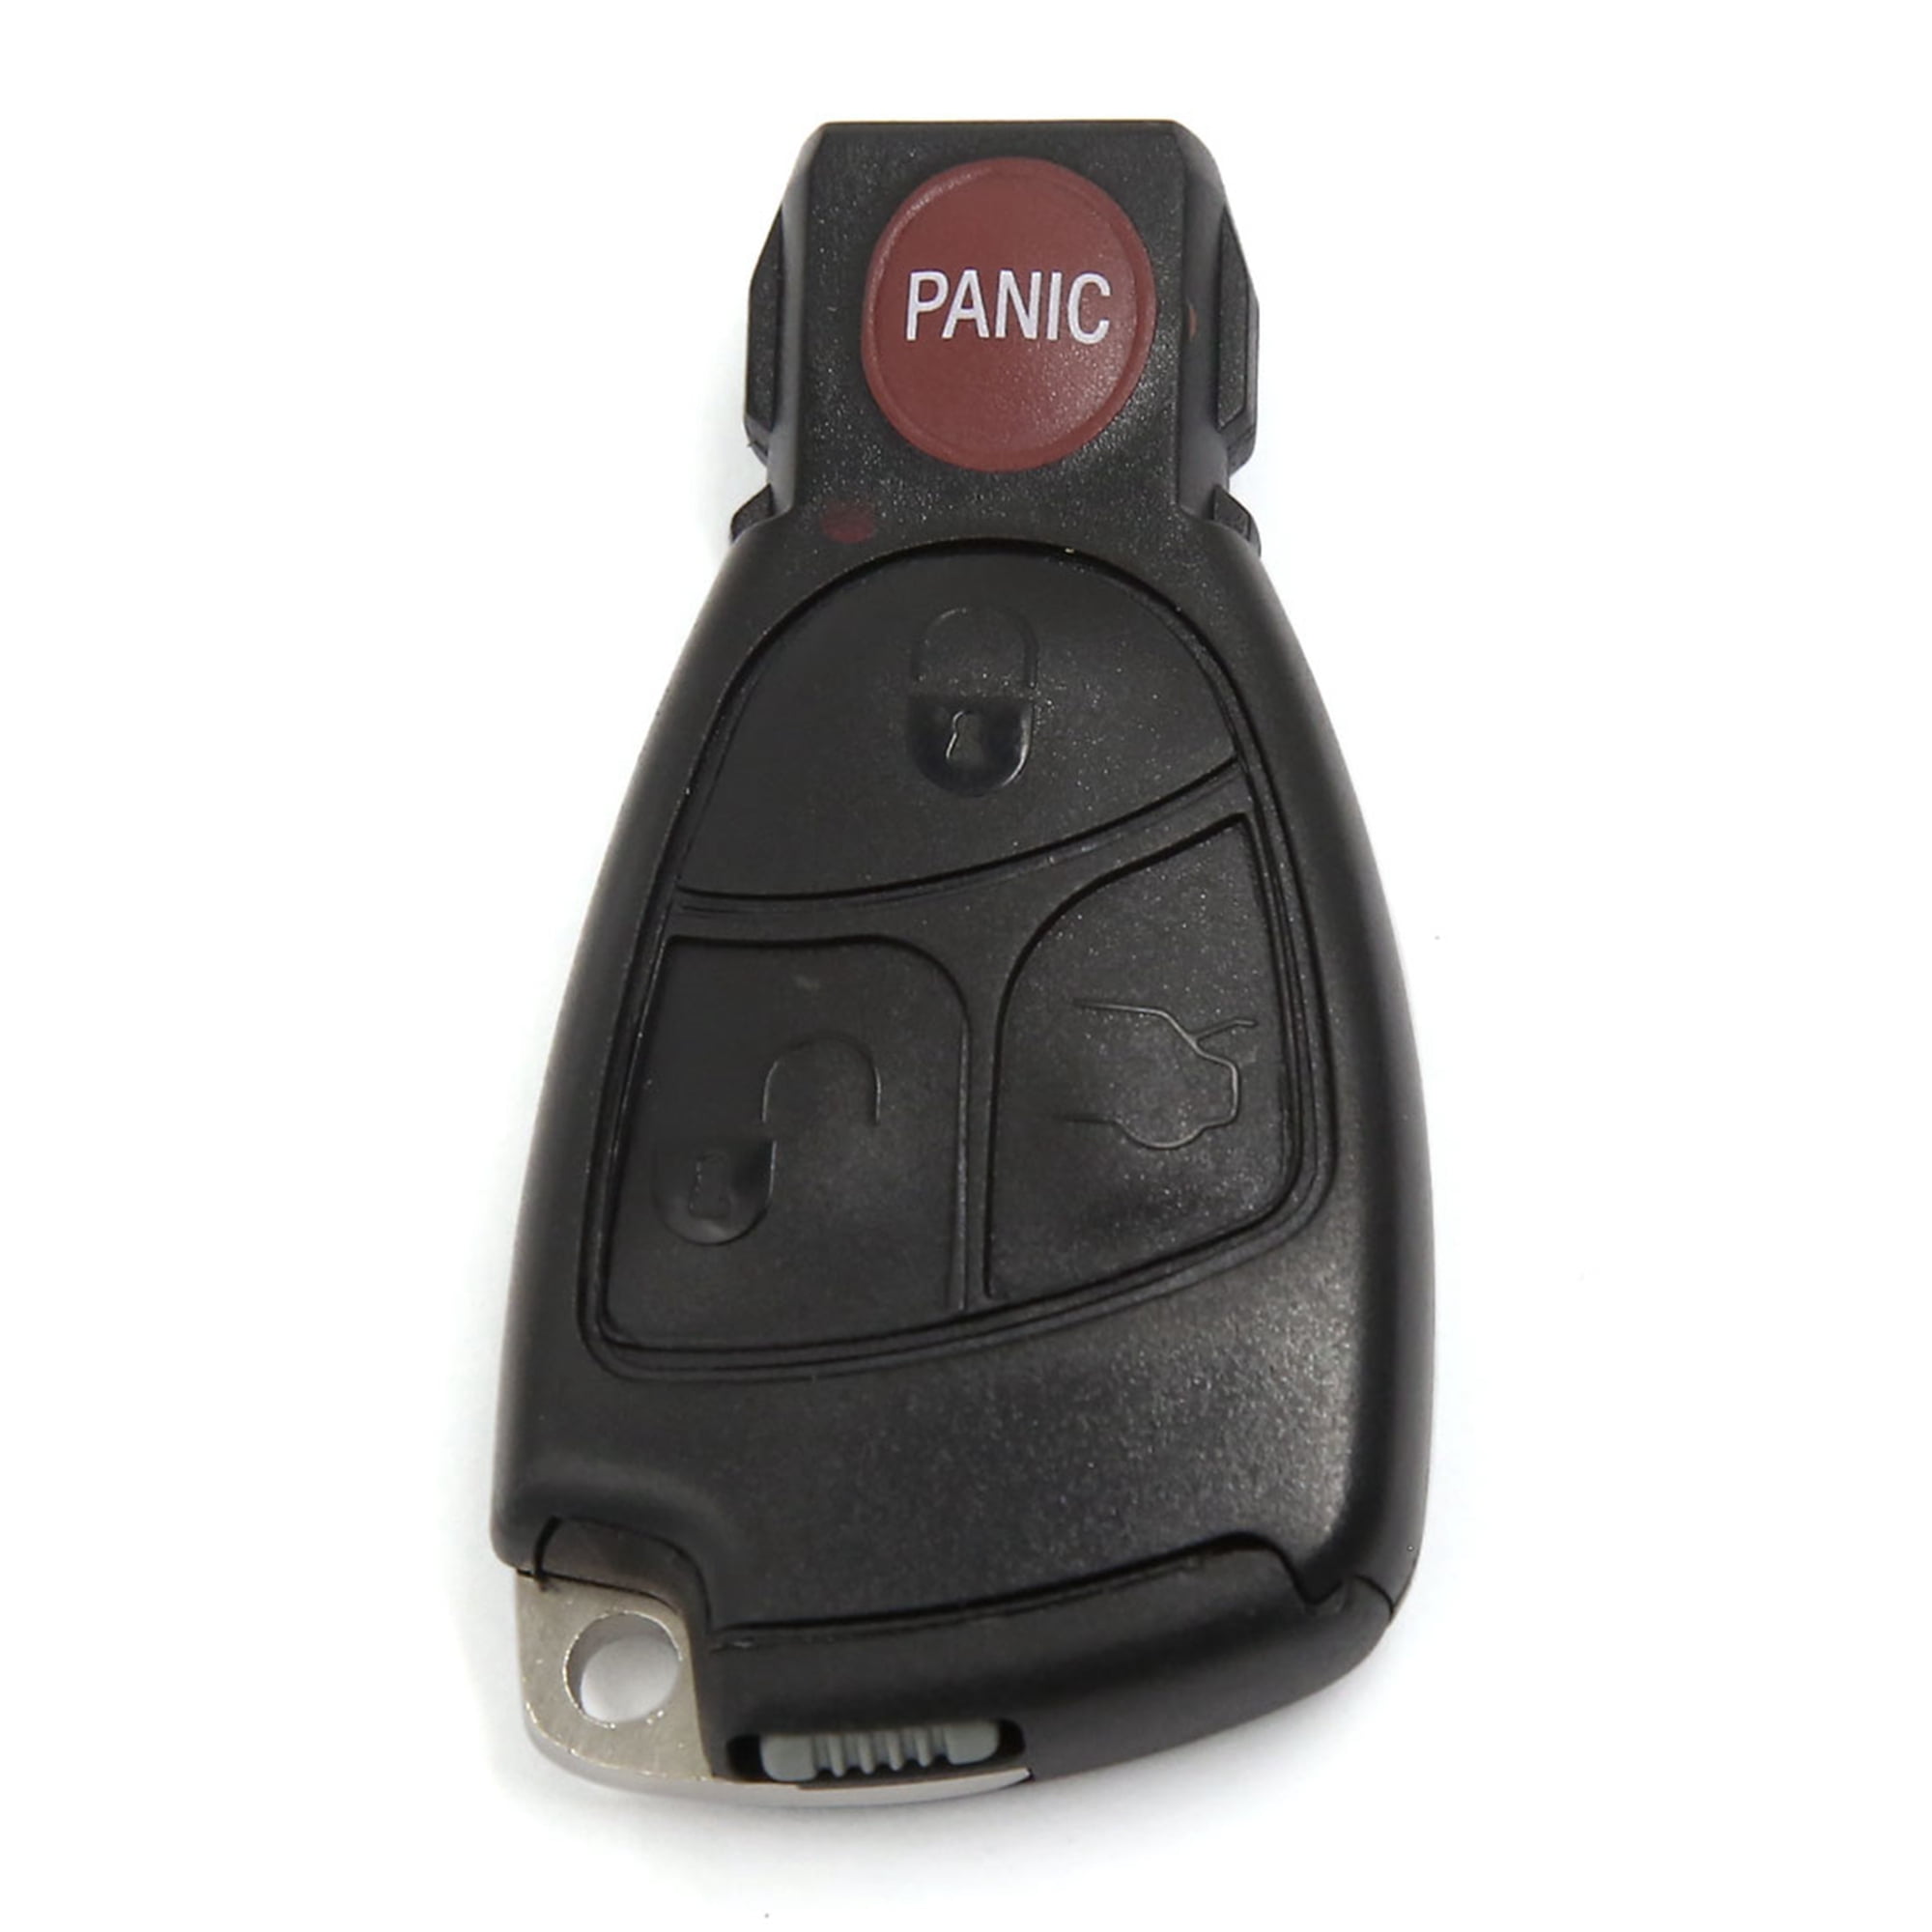 2 Remote Key Keyless Entry Transmitter for Mercedes Benz MB Smart Fortwo 